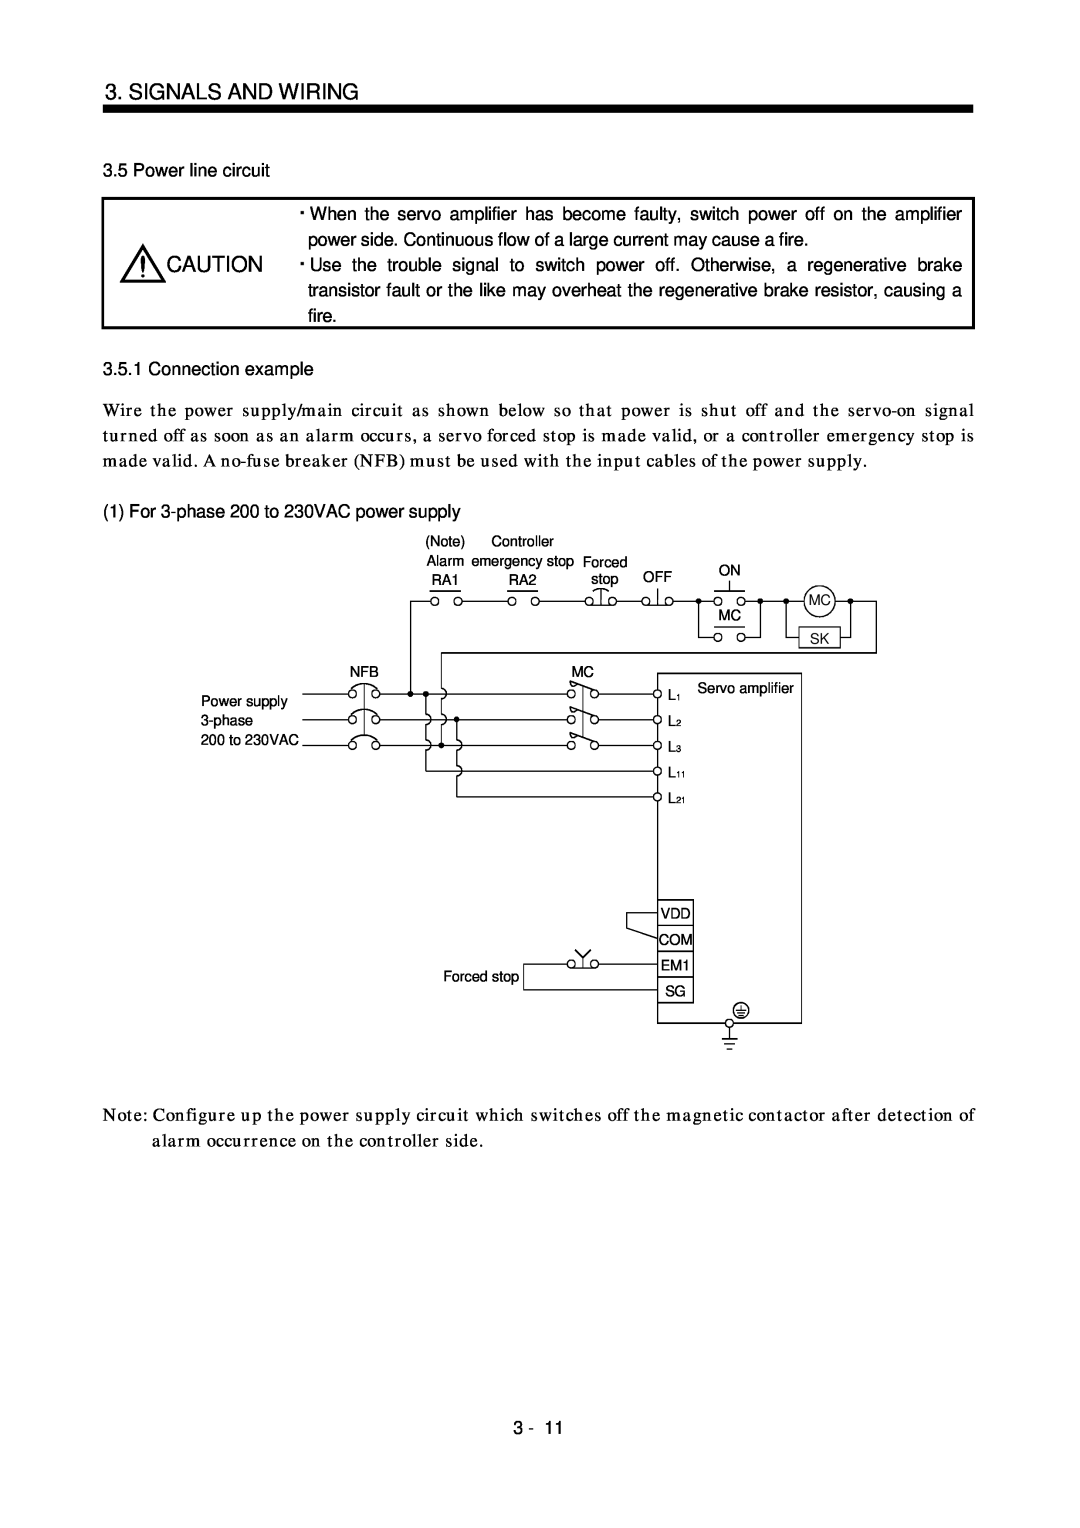 Bose MR-J2S- B instruction manual Power line circuit, Signals And Wiring 